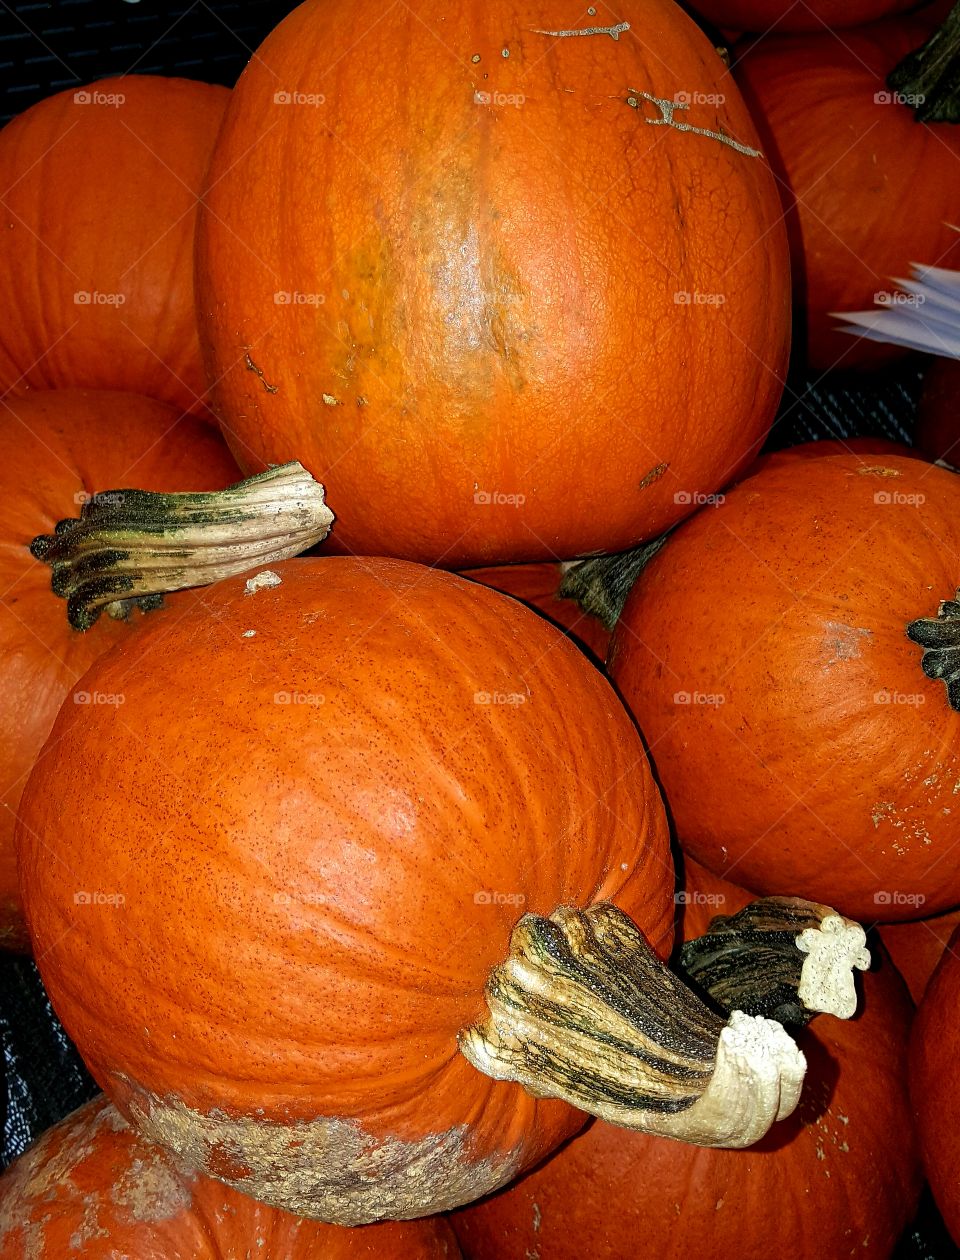 Pumpkins always make me think of autumn with its beautiful sights and delicious scents.